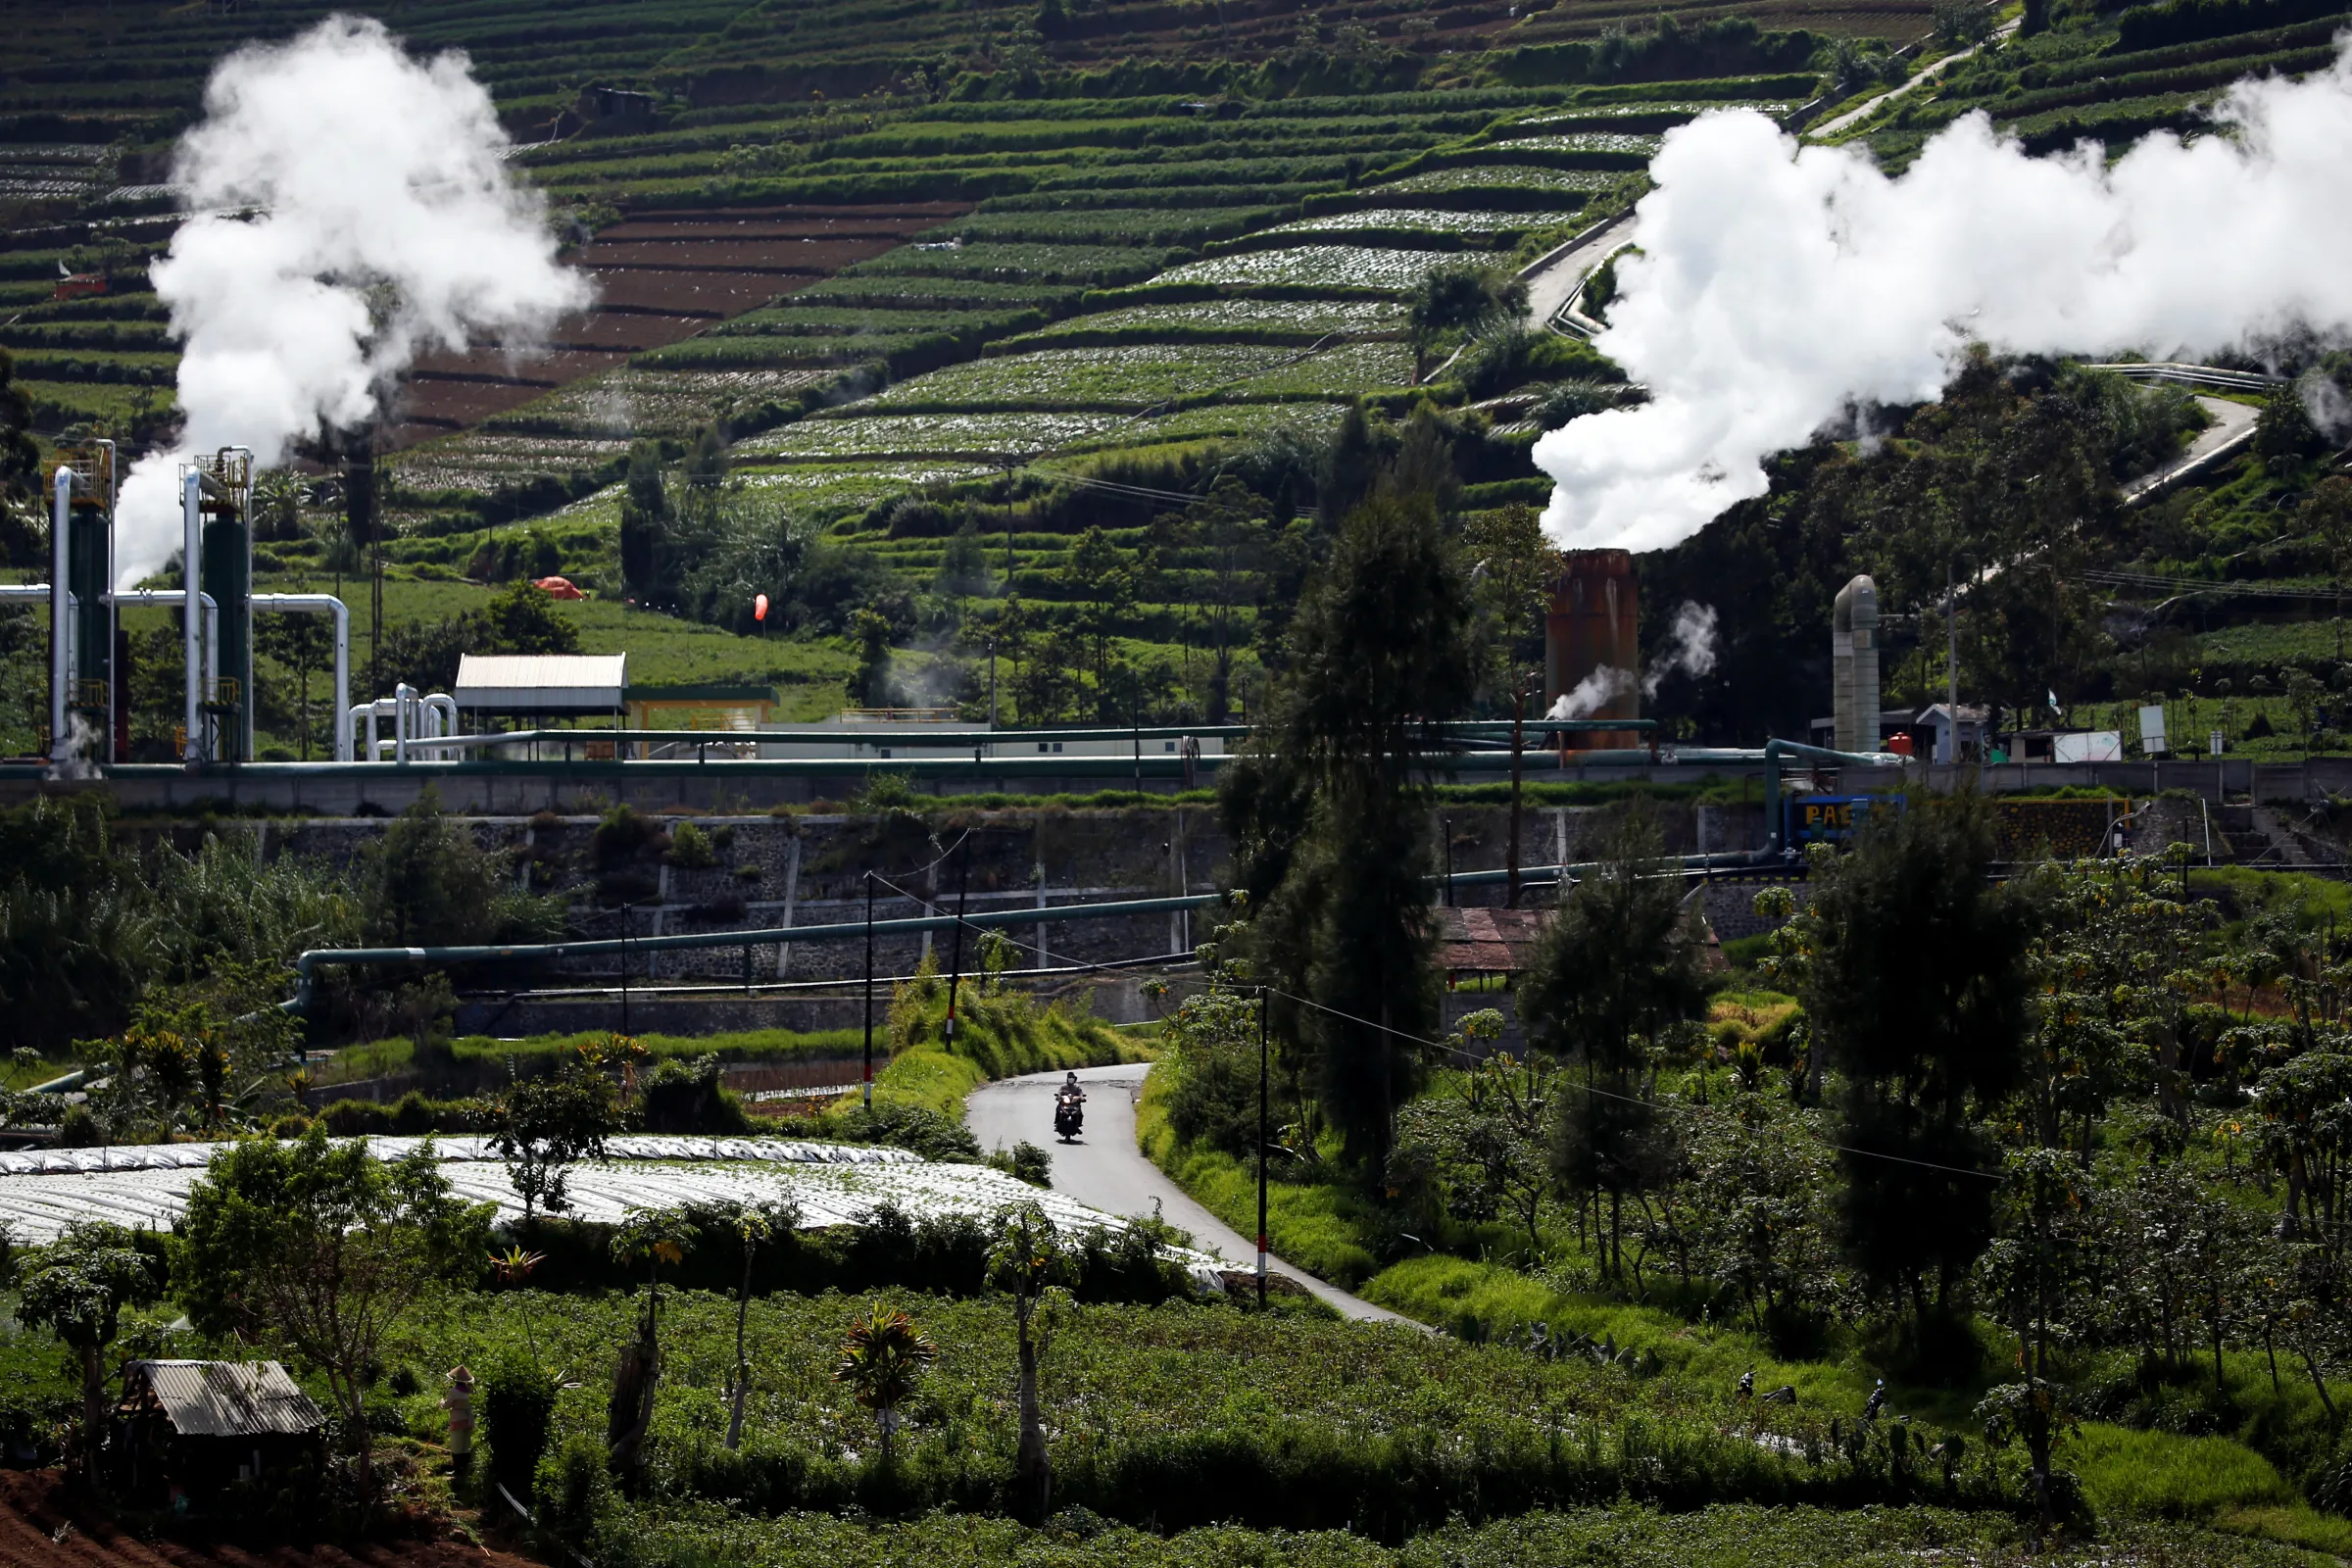 A local rides a motorbike on a road near geothermal power station unit (PLTP) owned by PT. Geo Dipa Energi (Persero) at Dieng mountain area in Banjarnegara, Central Java, Indonesia, November 15, 2020